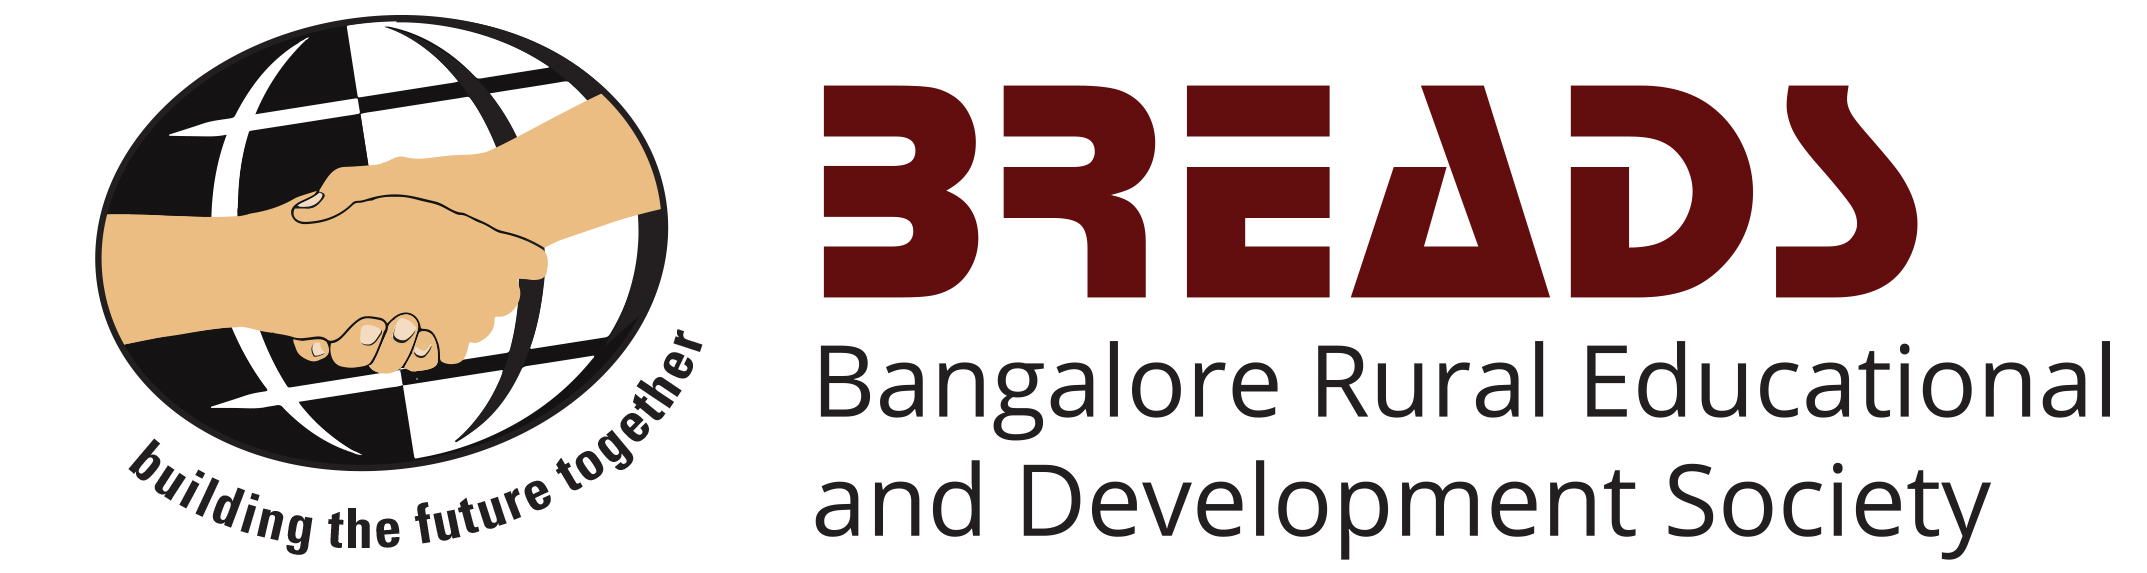 Bangalore Rural Educational And Development Society (BREADS)